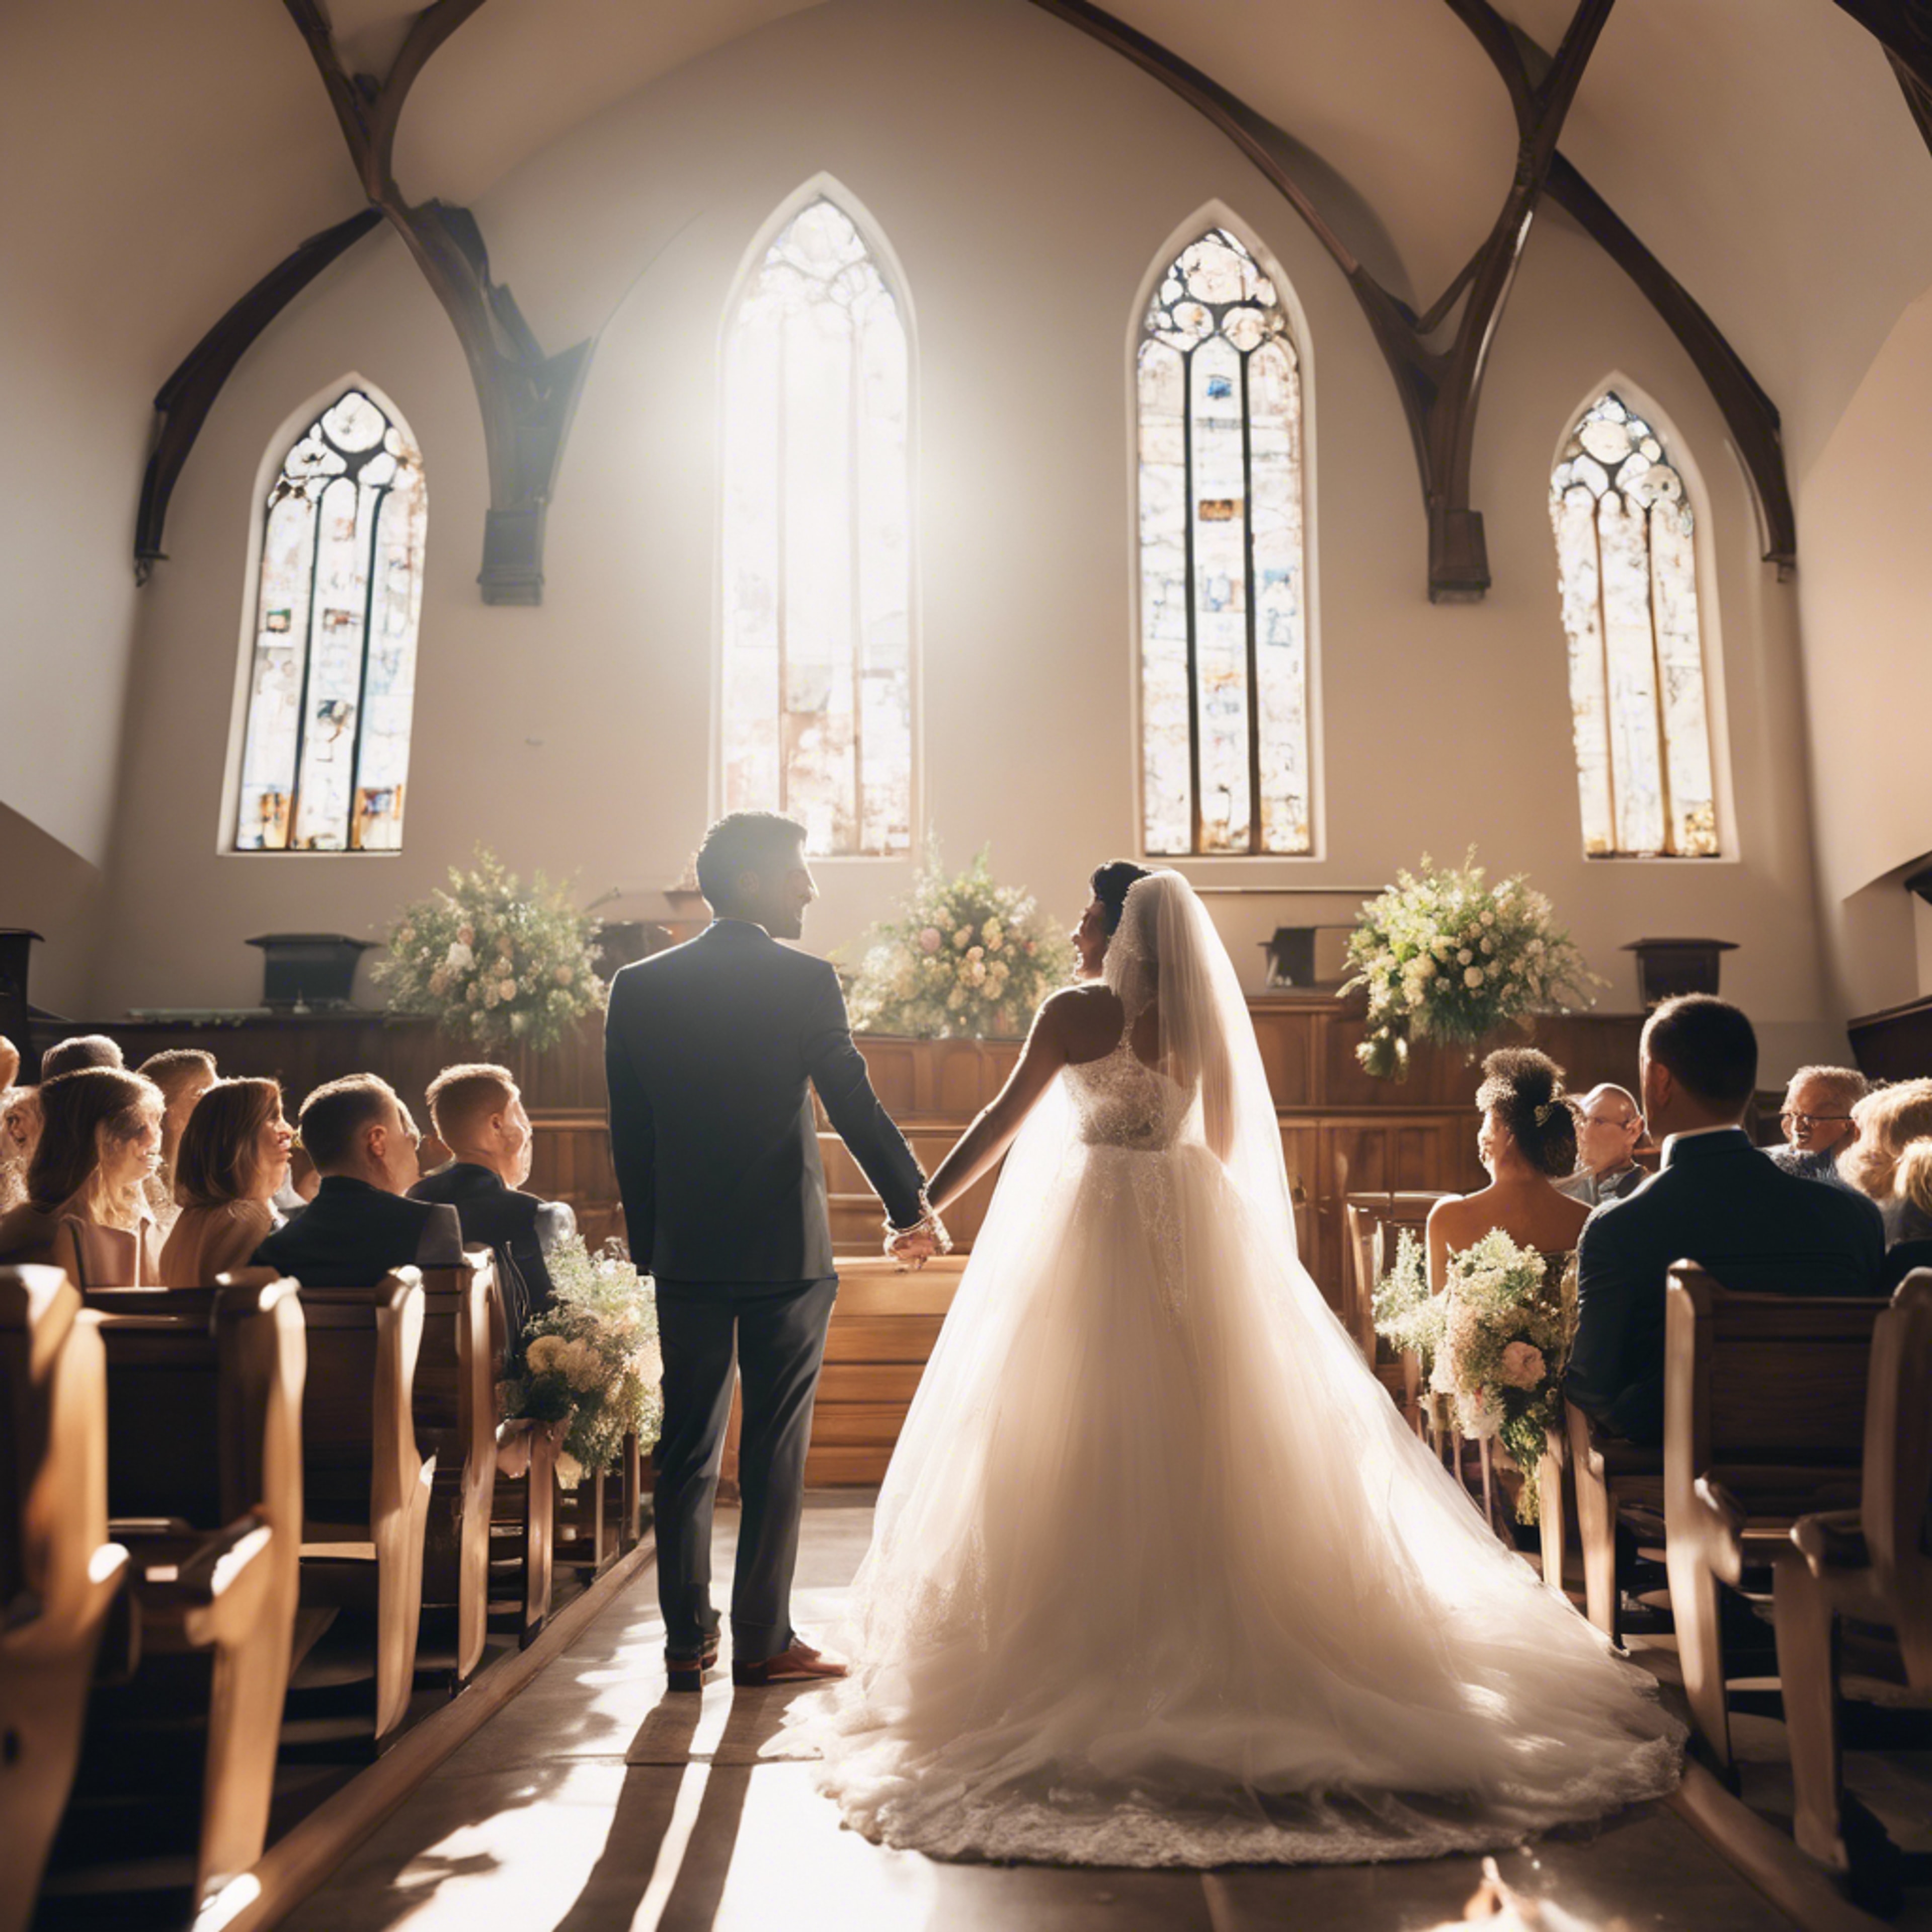 A happy couple getting married in a sunlit church, filled with joy and love. Ფონი[c91a19bd1c8e4c9b9bbb]